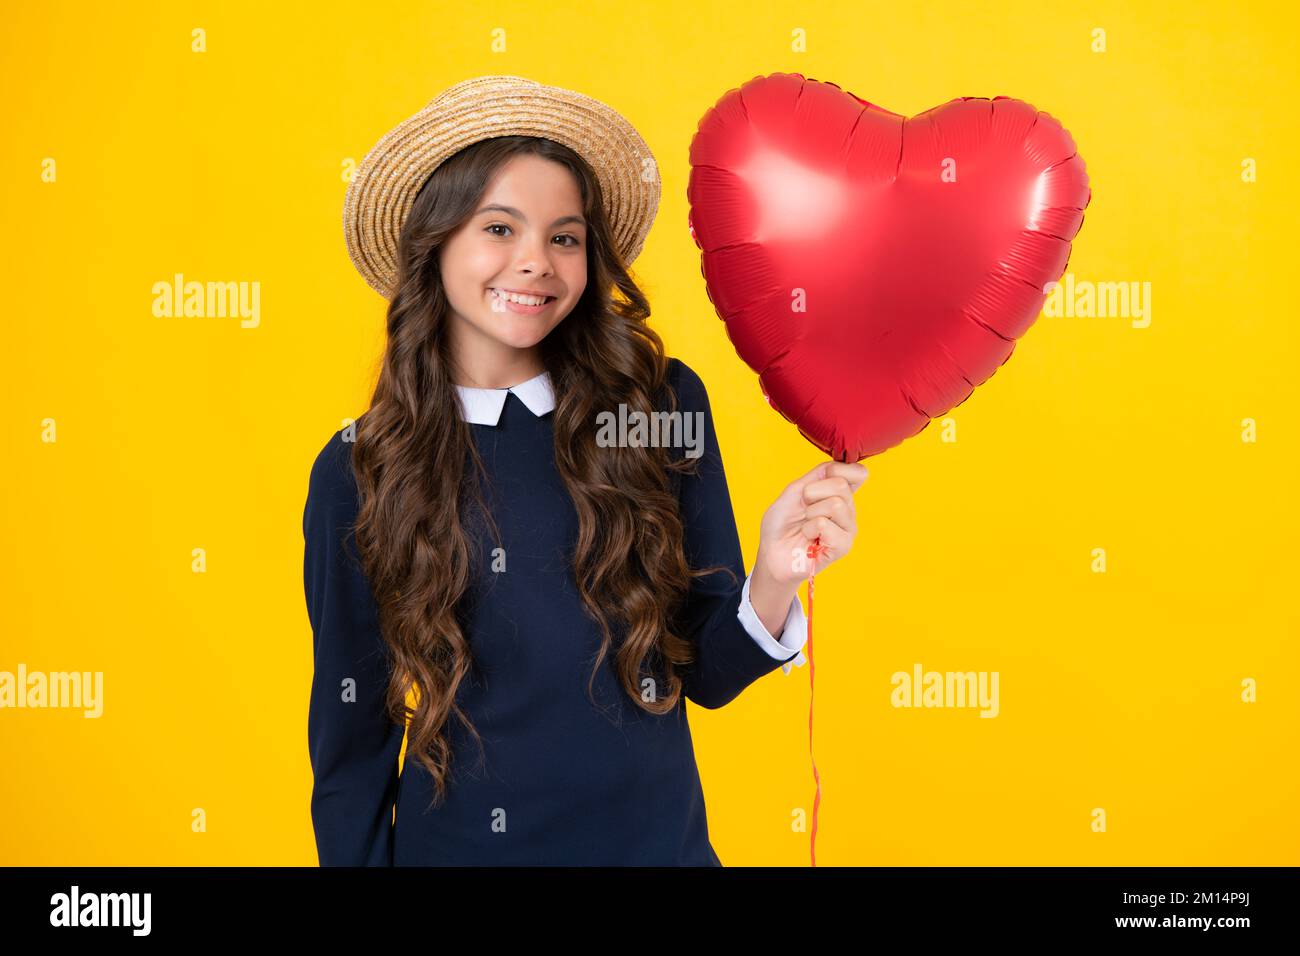 Lovely romantic teenage girl hold red heart balloon, symbol of love for valentines day isolated on yellow background. Stock Photo